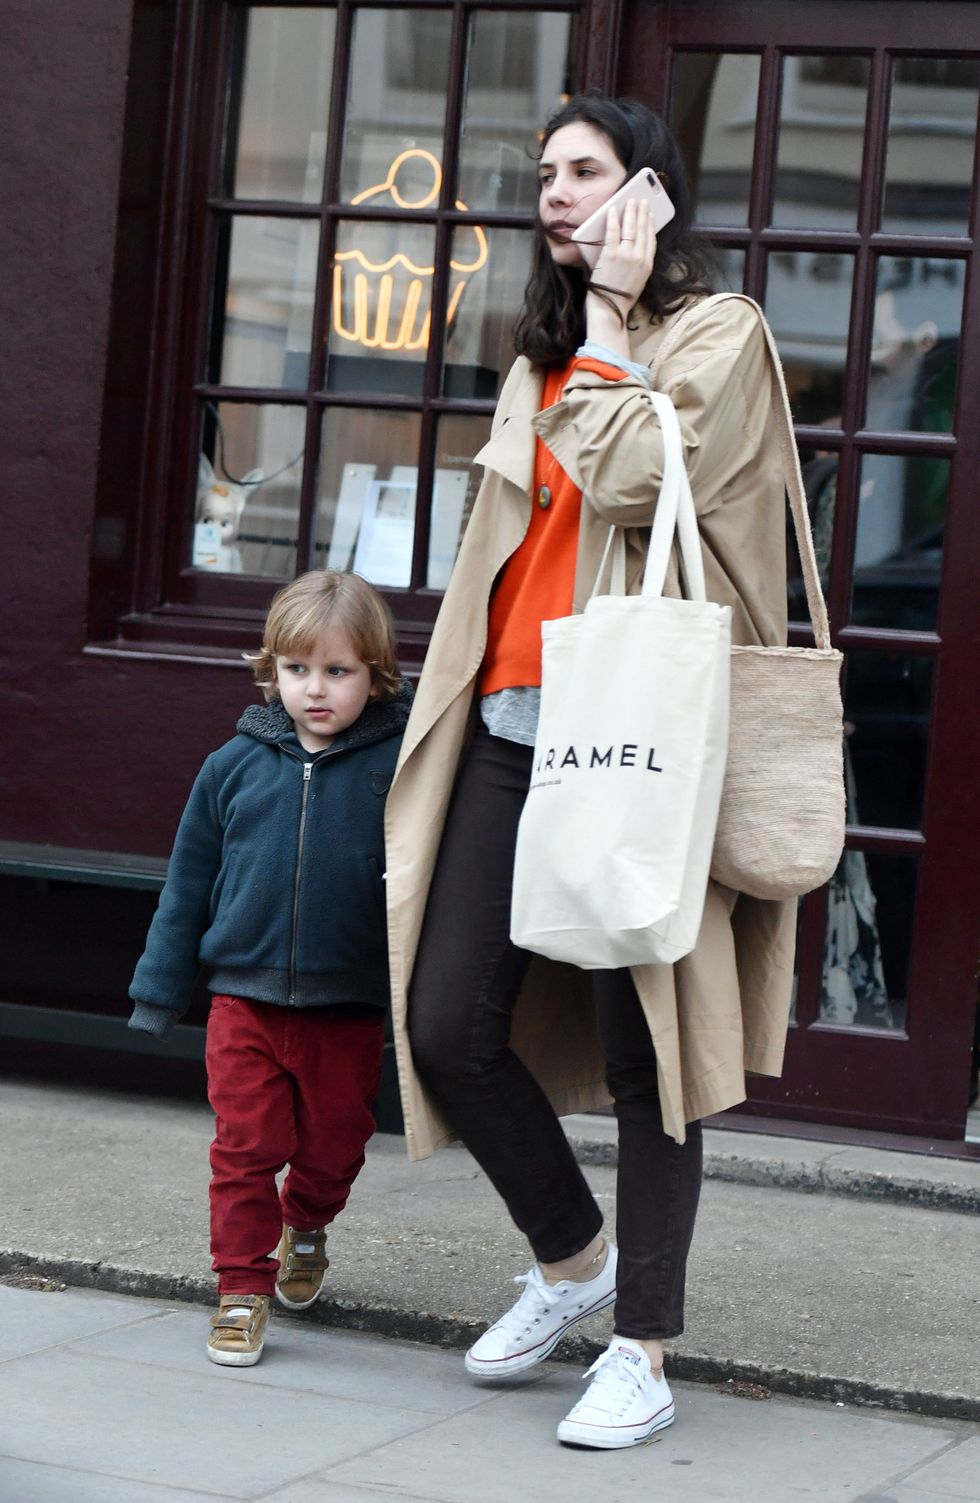 19 mar 2017 london uk exclusive all round pictures strictly not available for mail online and any online subscription deals unless fee agreed prior to usageandreas casiraghi and tatiana santo somingo take their children shopping for clothes ahead of alexandre's 4th birthday the family were all seen out and about shopping at caramel in notting hill andreas arrived after tatiana on his skateboard and left to go to the pub opposite before admiring a supercar that was parked in the street andreas and india were seen with play stickers over their clothes tatiana left the store with clothes for alexandre probably for his birthday partybyline must read xposurephotoscomuk clients pictures containing children please pixelate face prior to publication uk clients must call prior to tv or online usage please telephone 44 208 344 2007